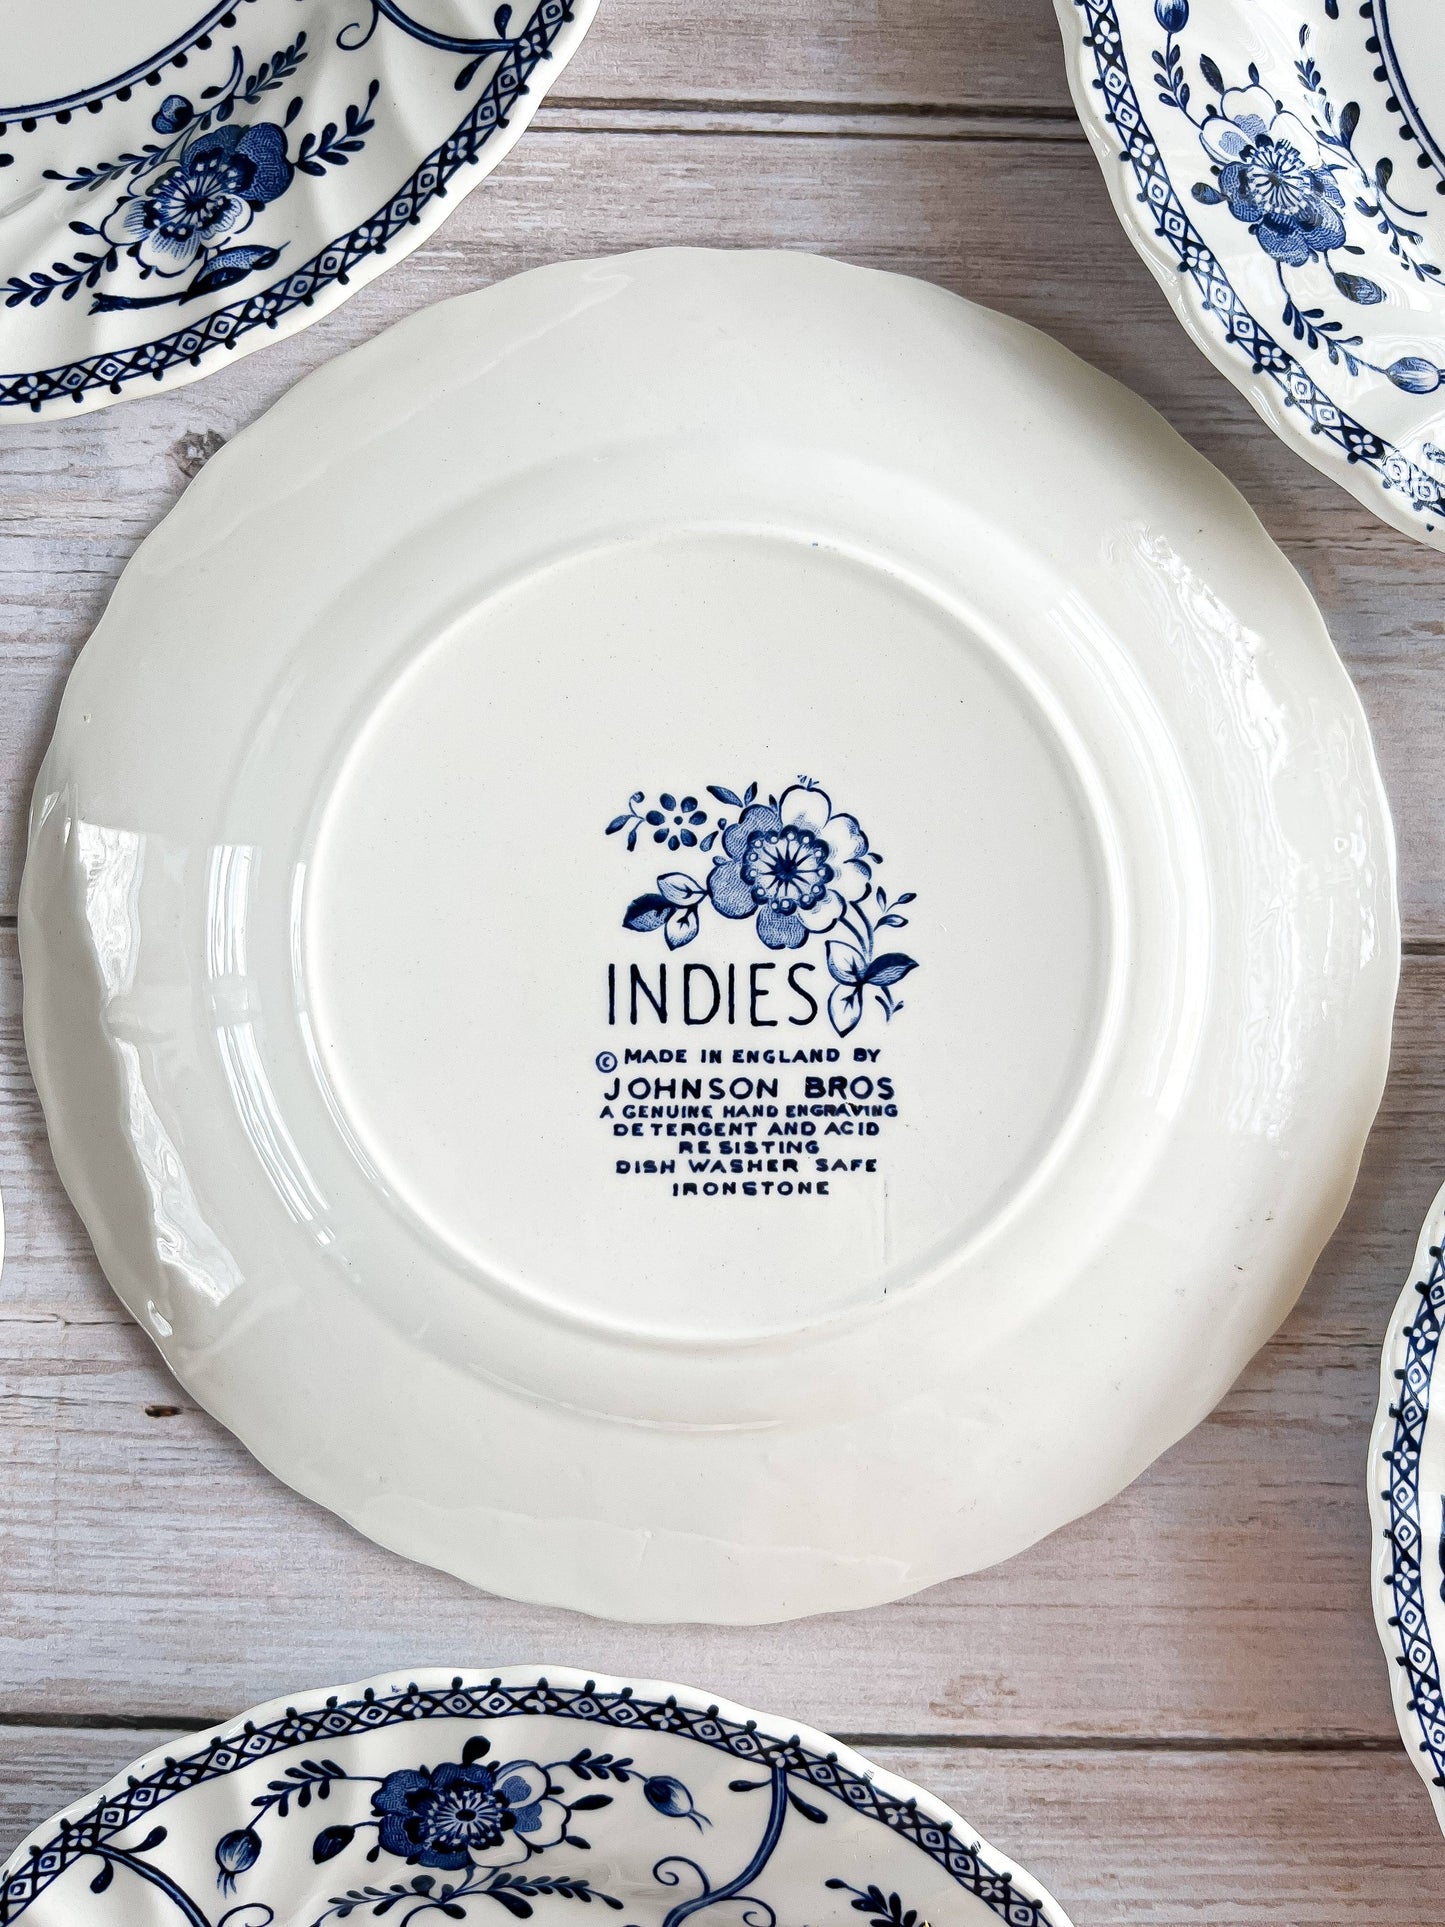 Johnson Bros Set of 6 Bread & Butter Plates - 'Indies' in Blue Collection - SOSC Home